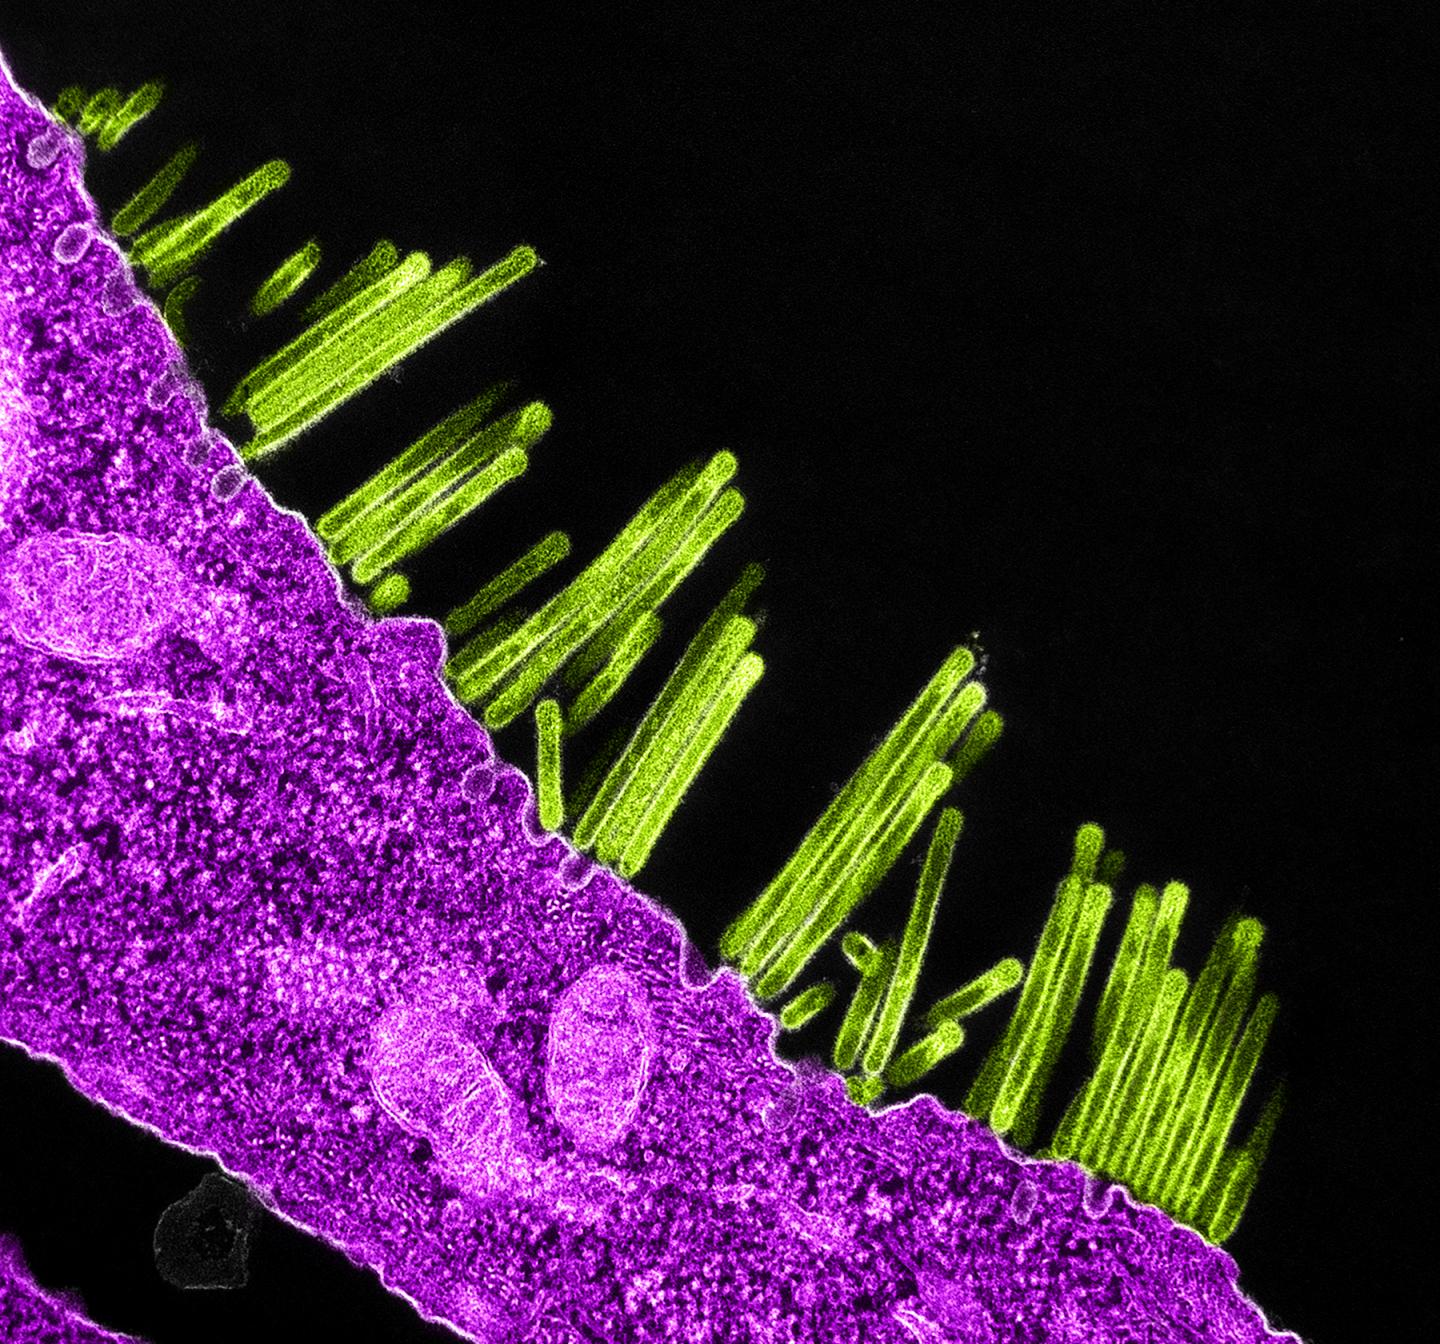 Swine Flu Virus Particles Budding from the Surface of a Cell